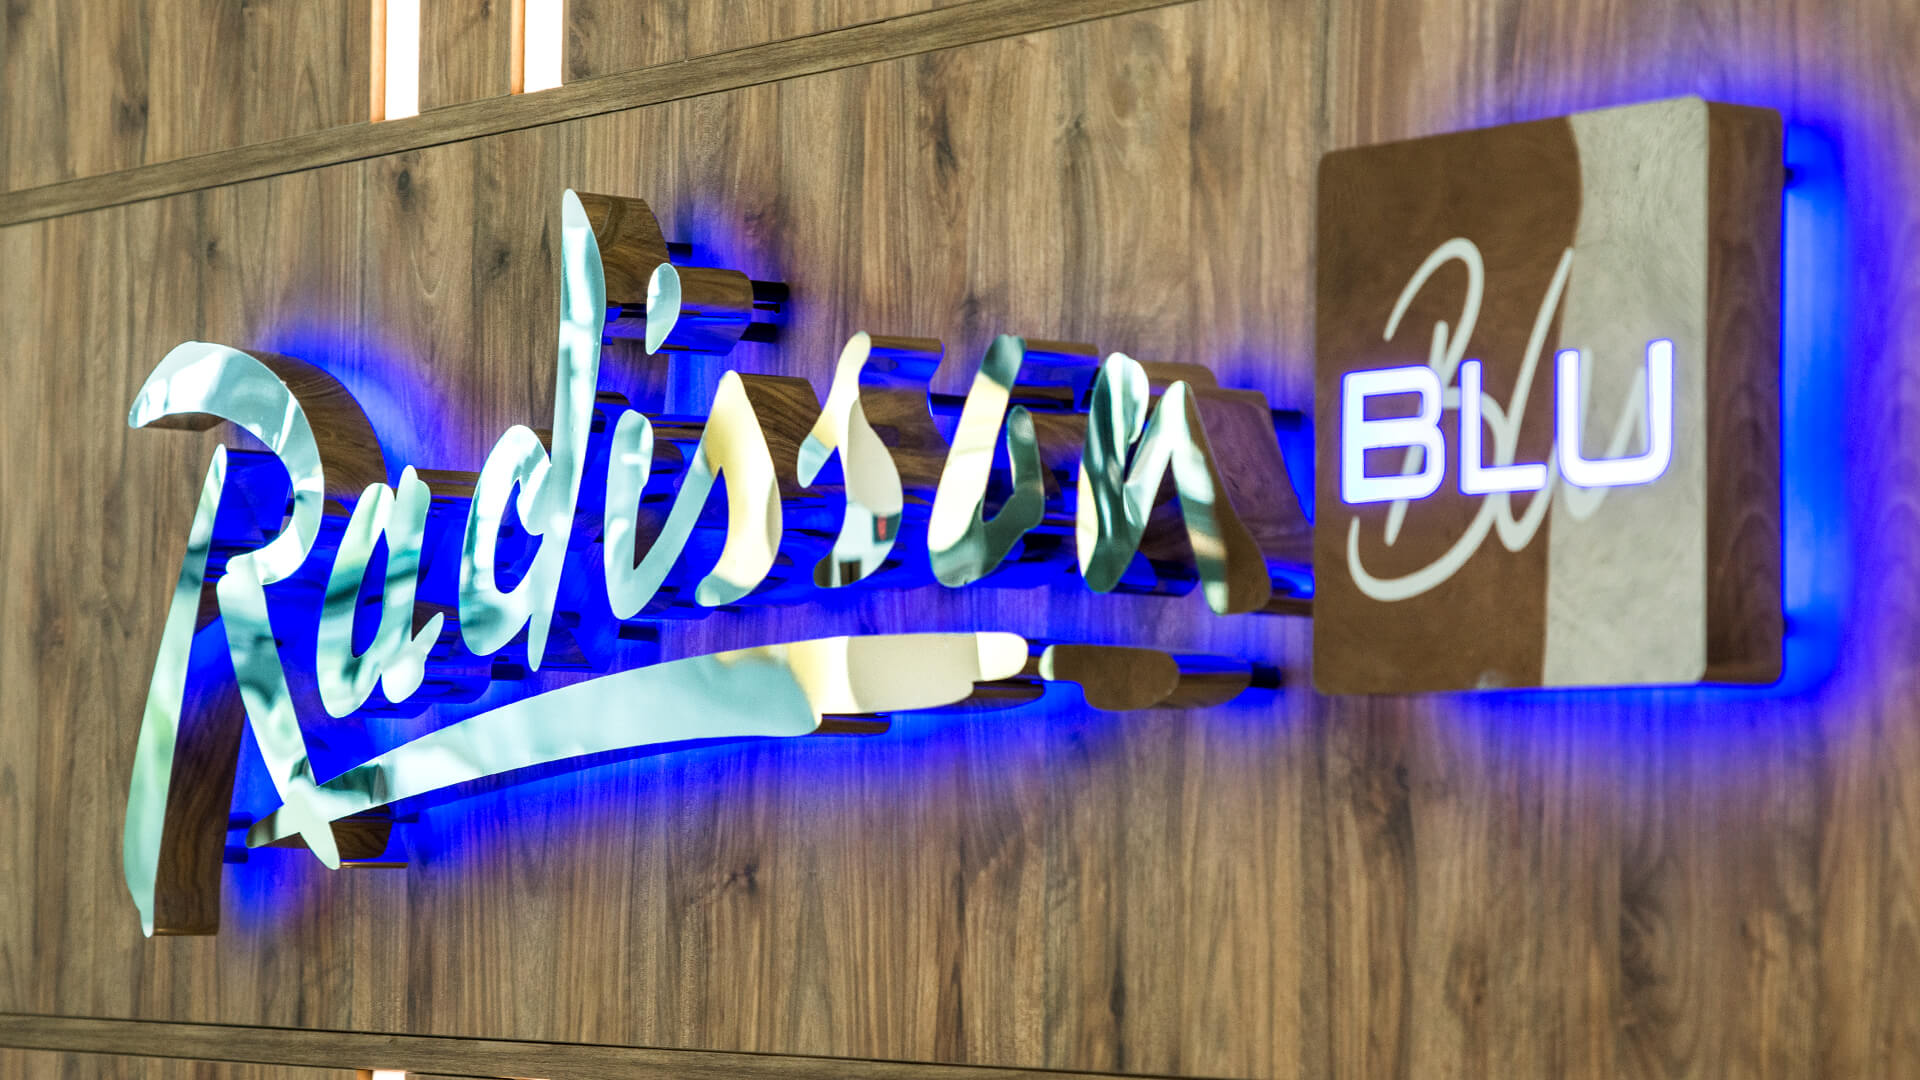 radisson Sopot blu hotel - radisson-blu-letters-in-stainless-steel-literal-lettering-behind-reception-in-hotel-on-a-wooden-wall-literal-lettering-literal-illuminated-from-behind-on-blue-sopot-logo-firm-literal-lettering-exclusive-glamour